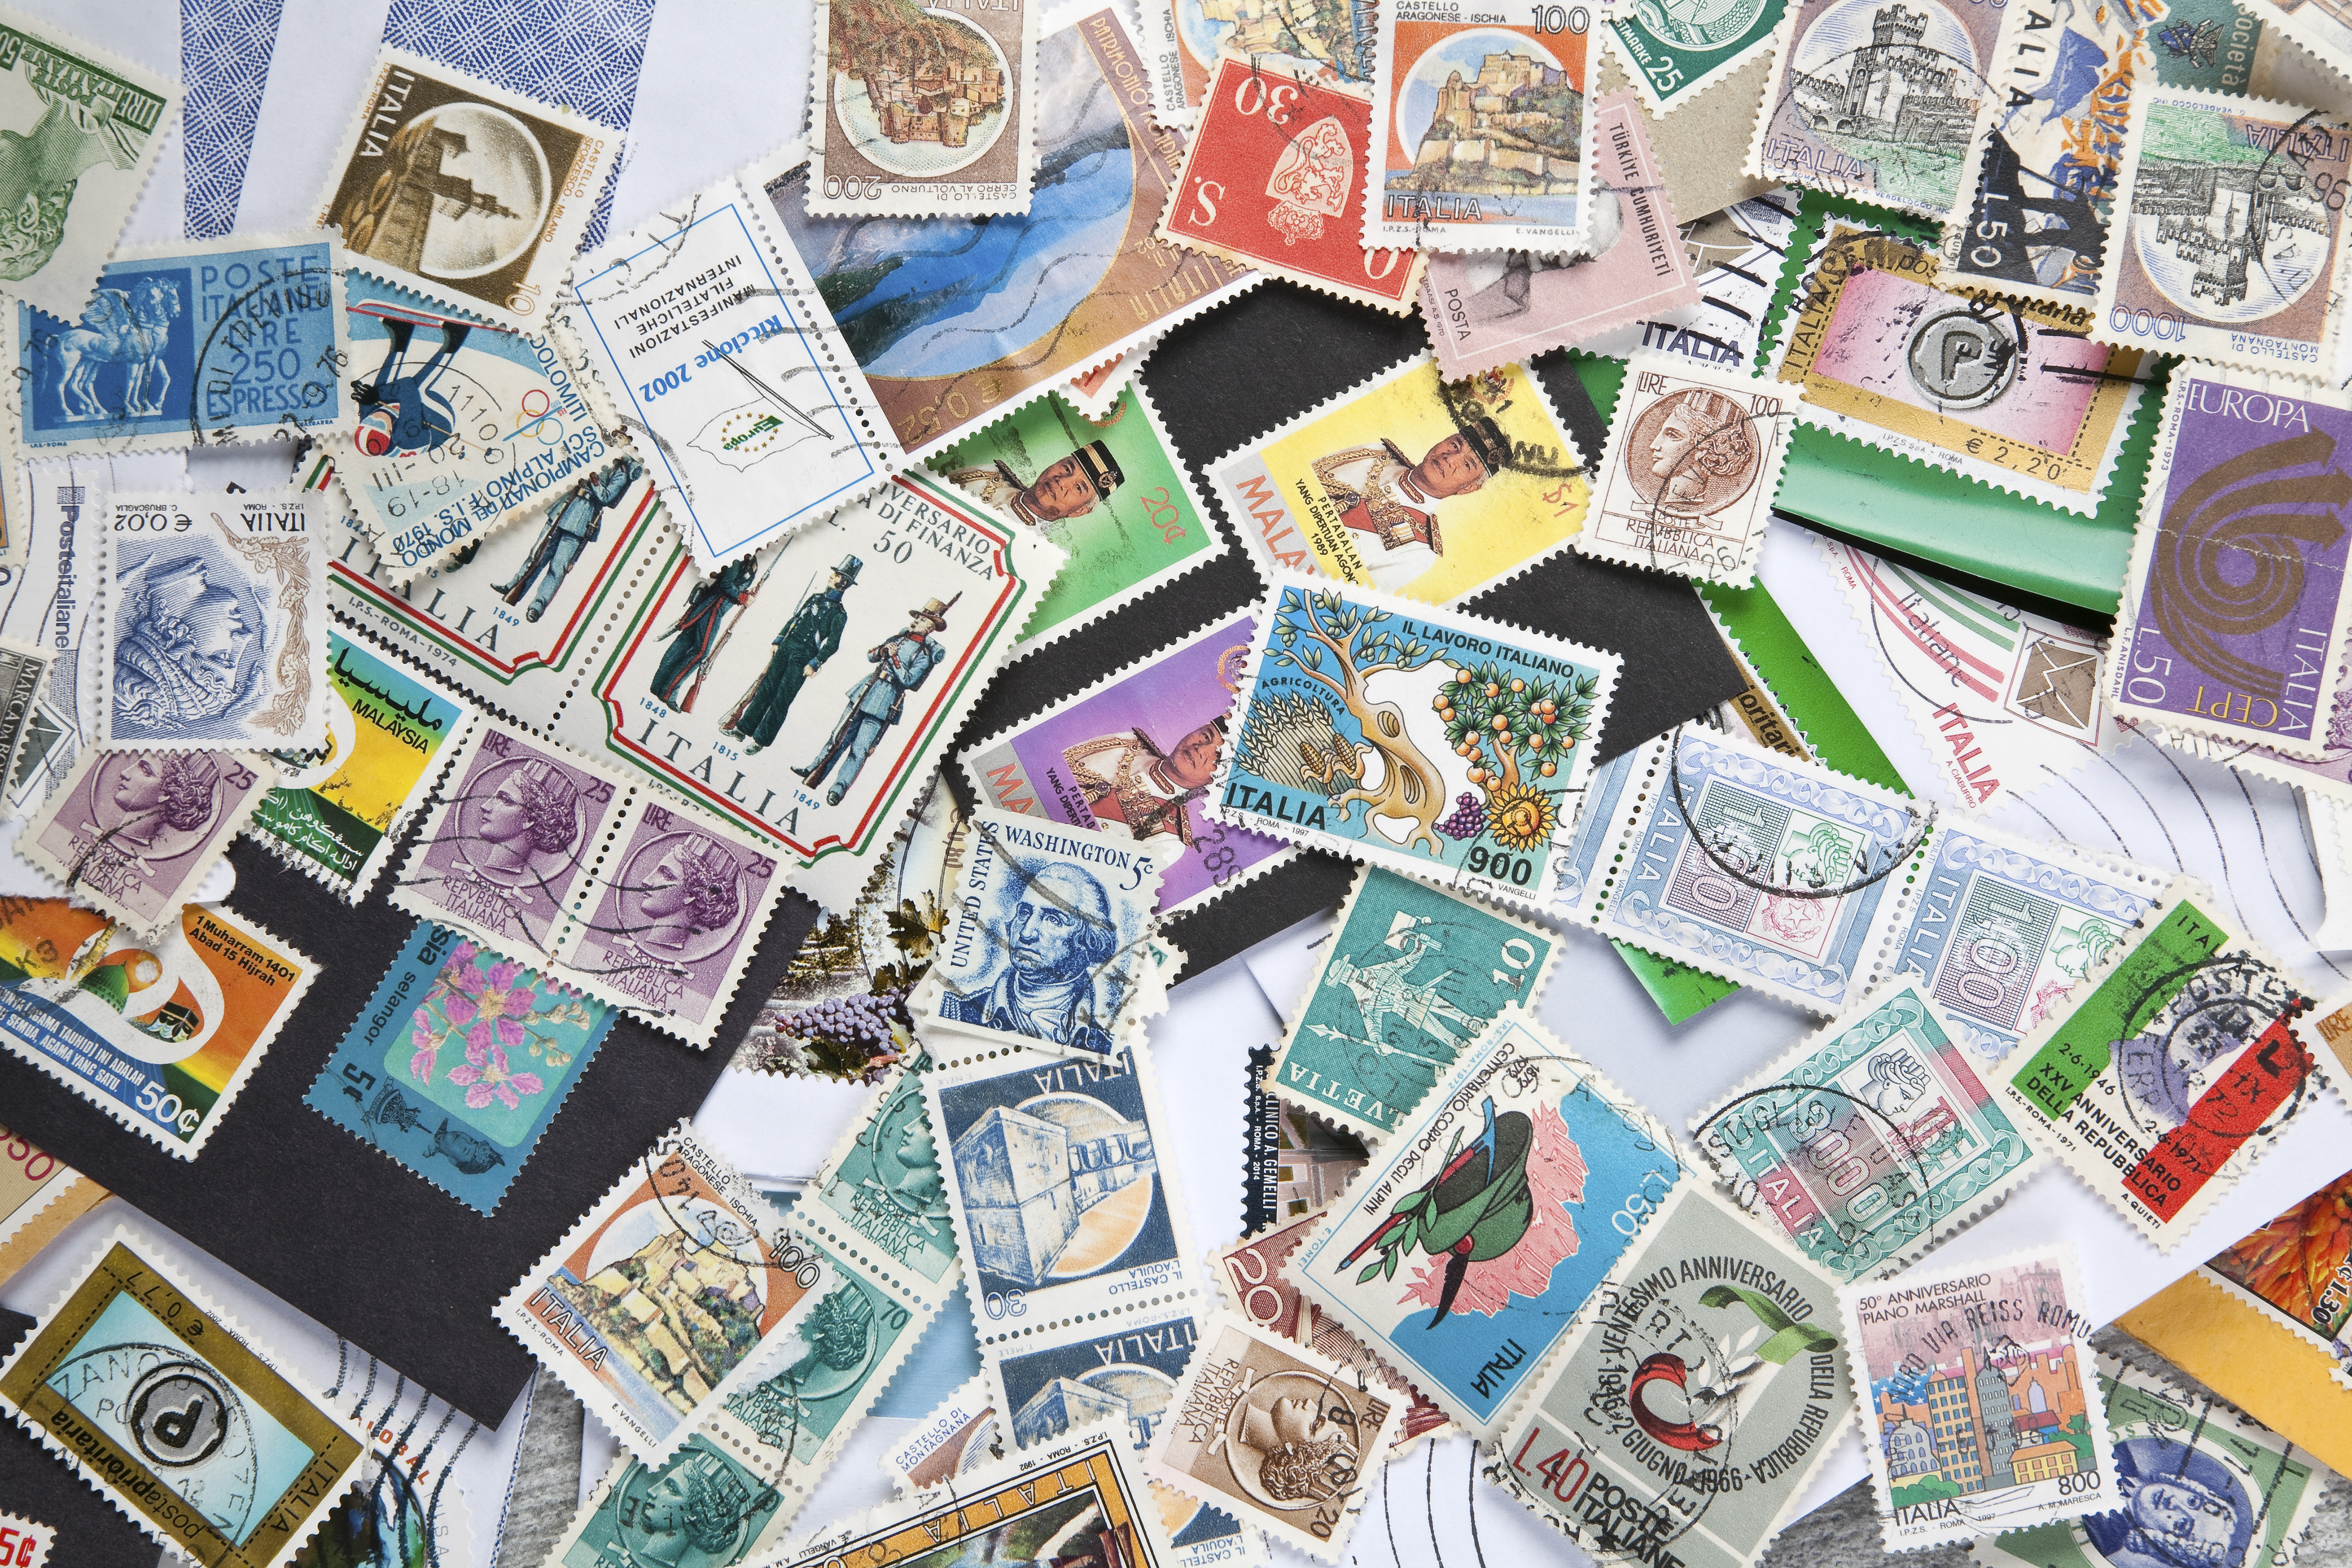 Want to know, where to buy stamps? You can purchase postage stamps